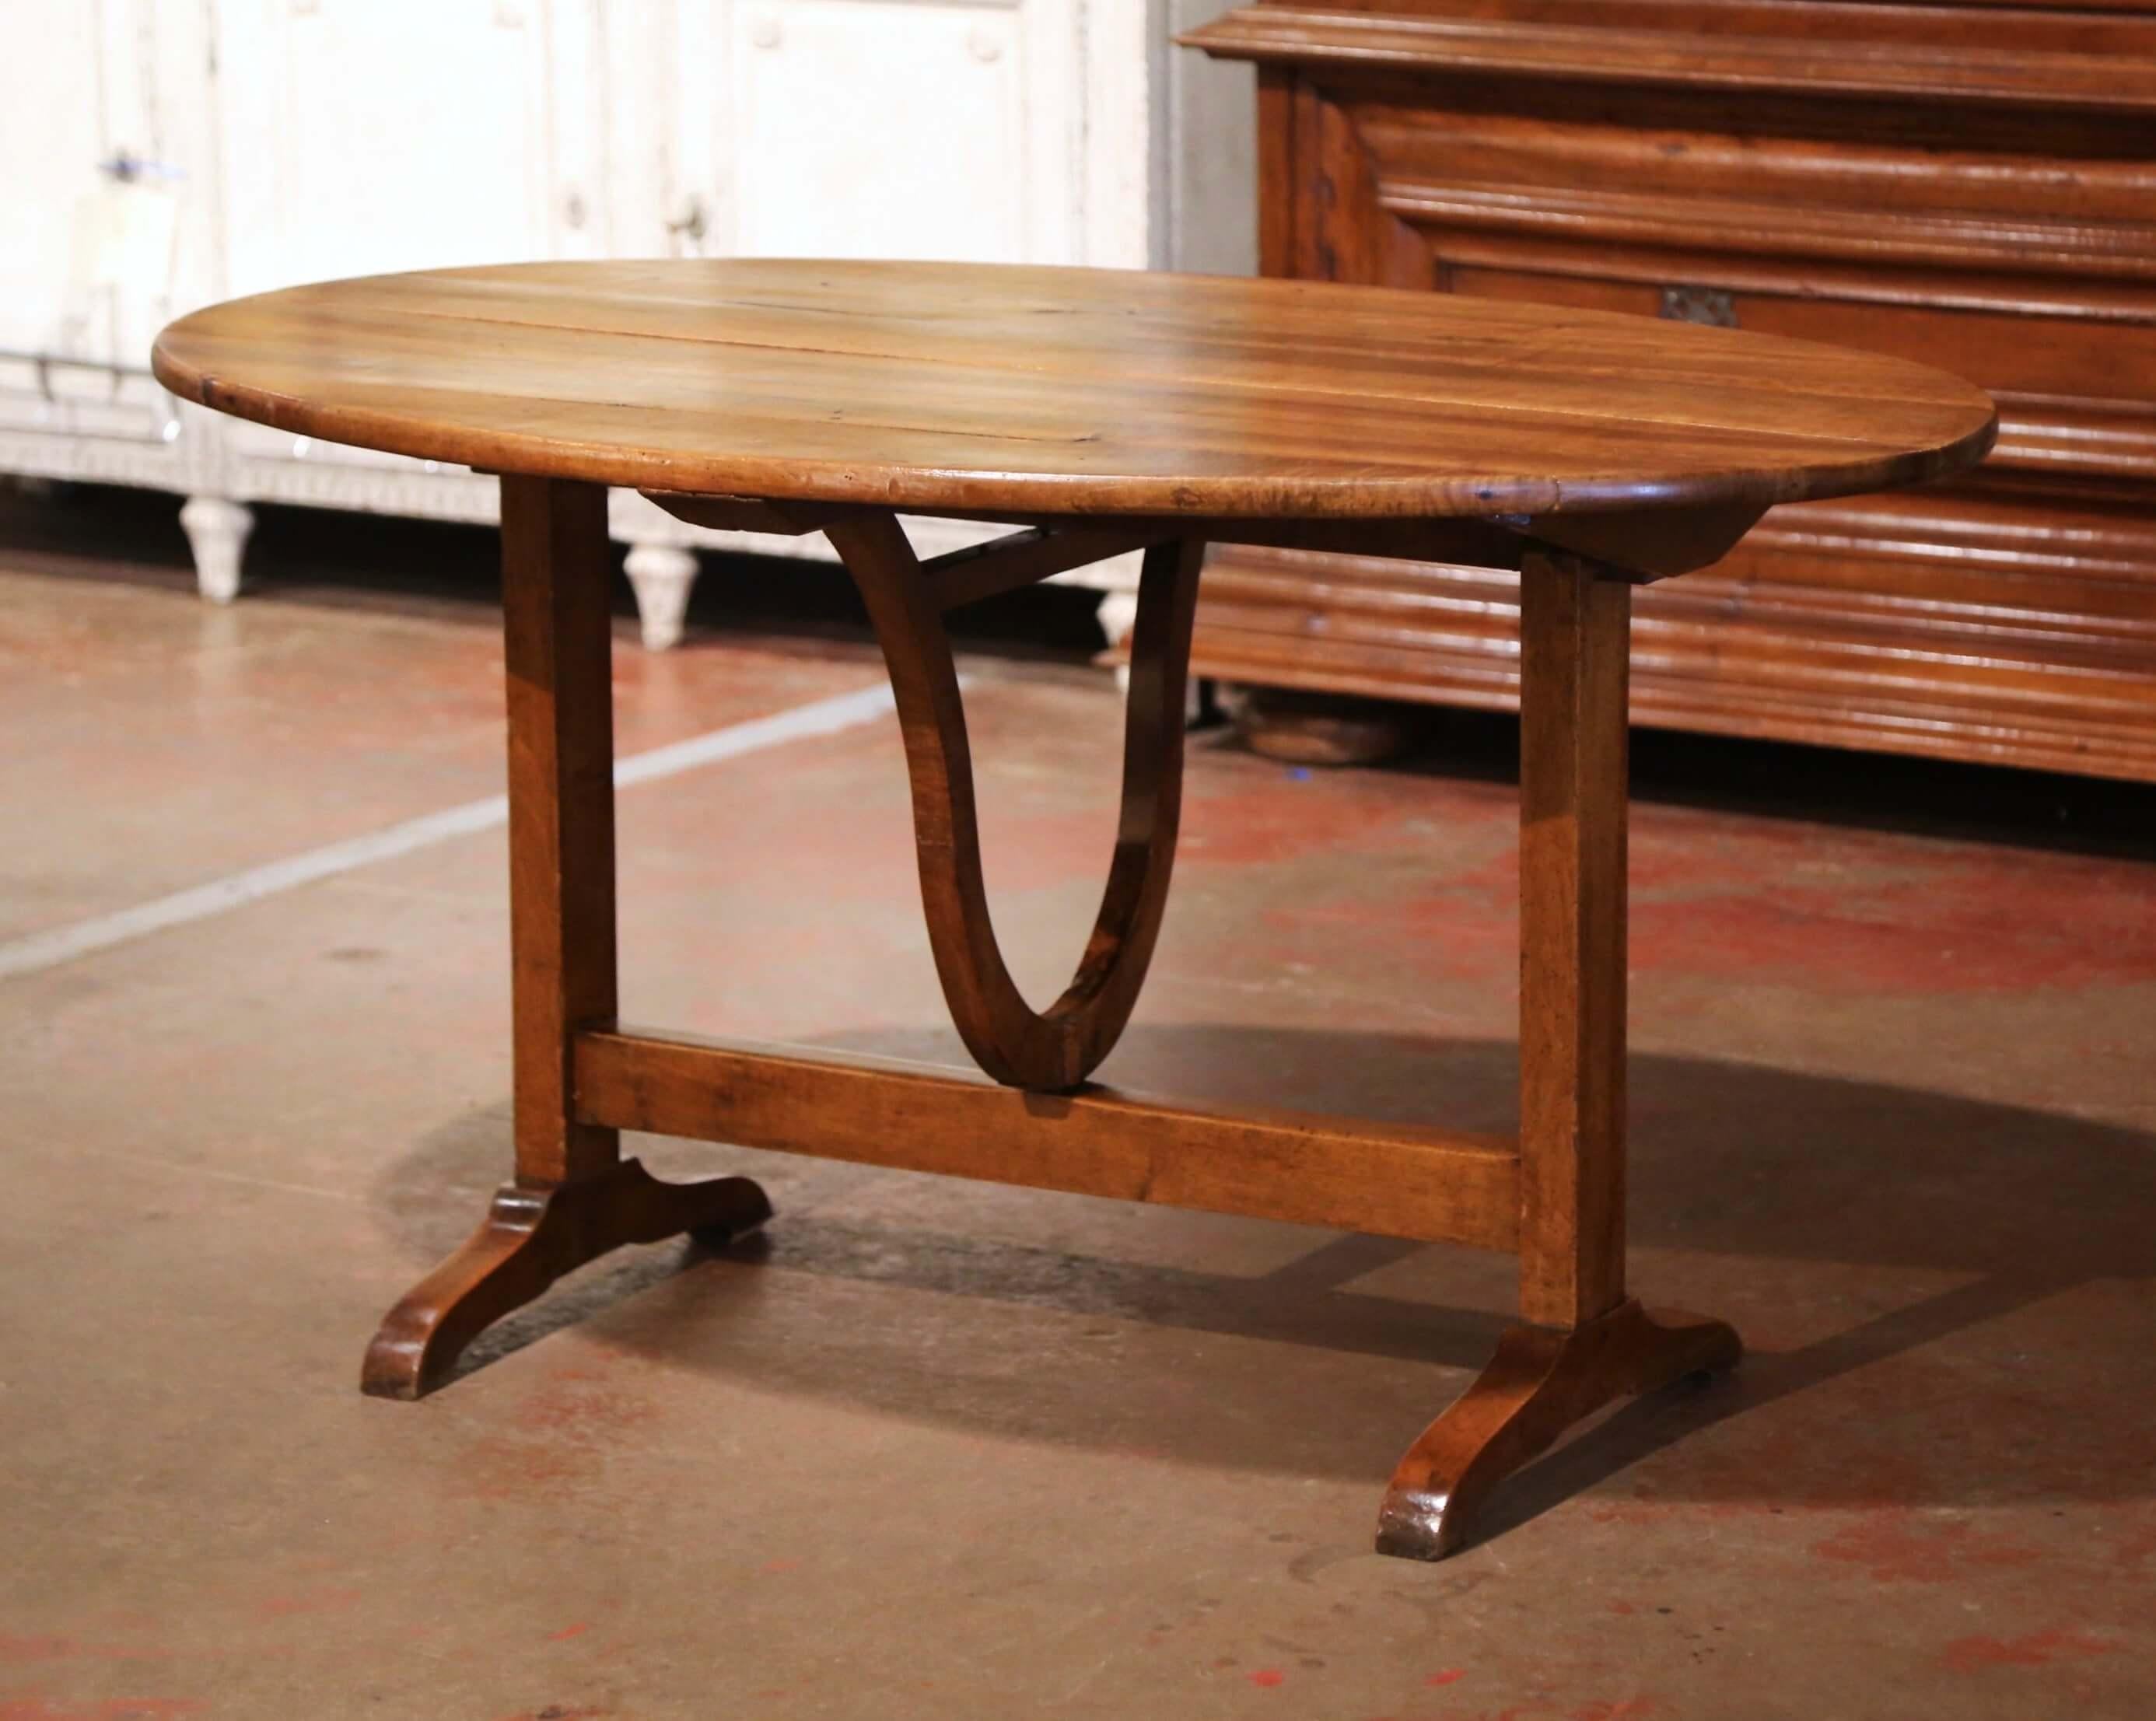 Hand-Carved Mid-19th Century French Carved Walnut Tilt-Top Wine Tasting Table from Bordeaux